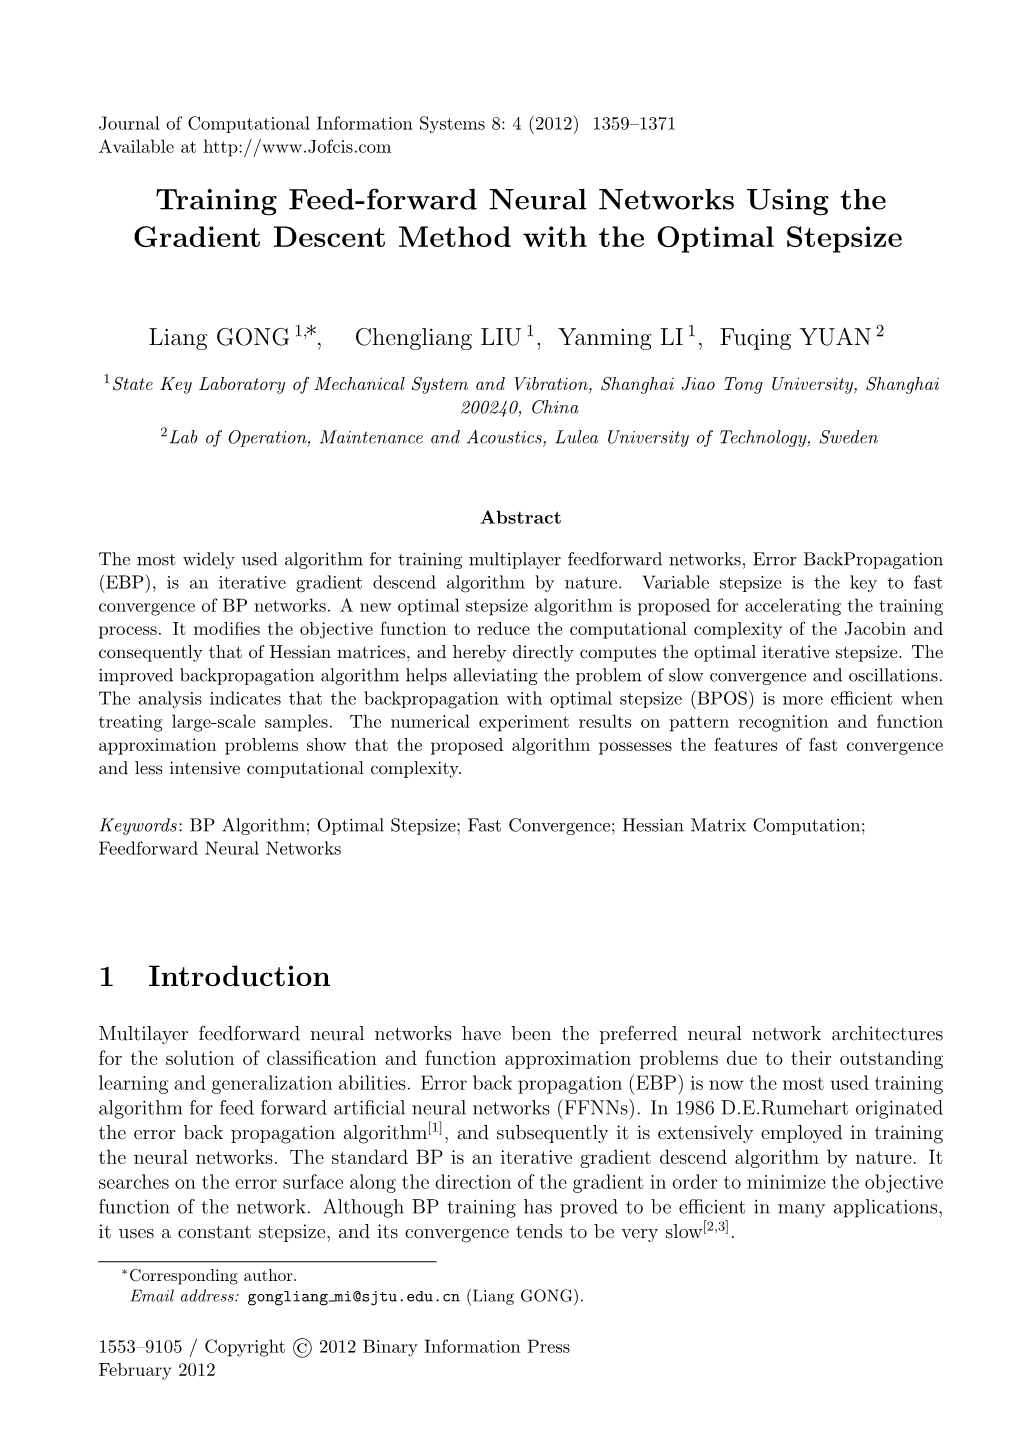 Training Feed-Forward Neural Networks Using the Gradient Descent Method with the Optimal Stepsize